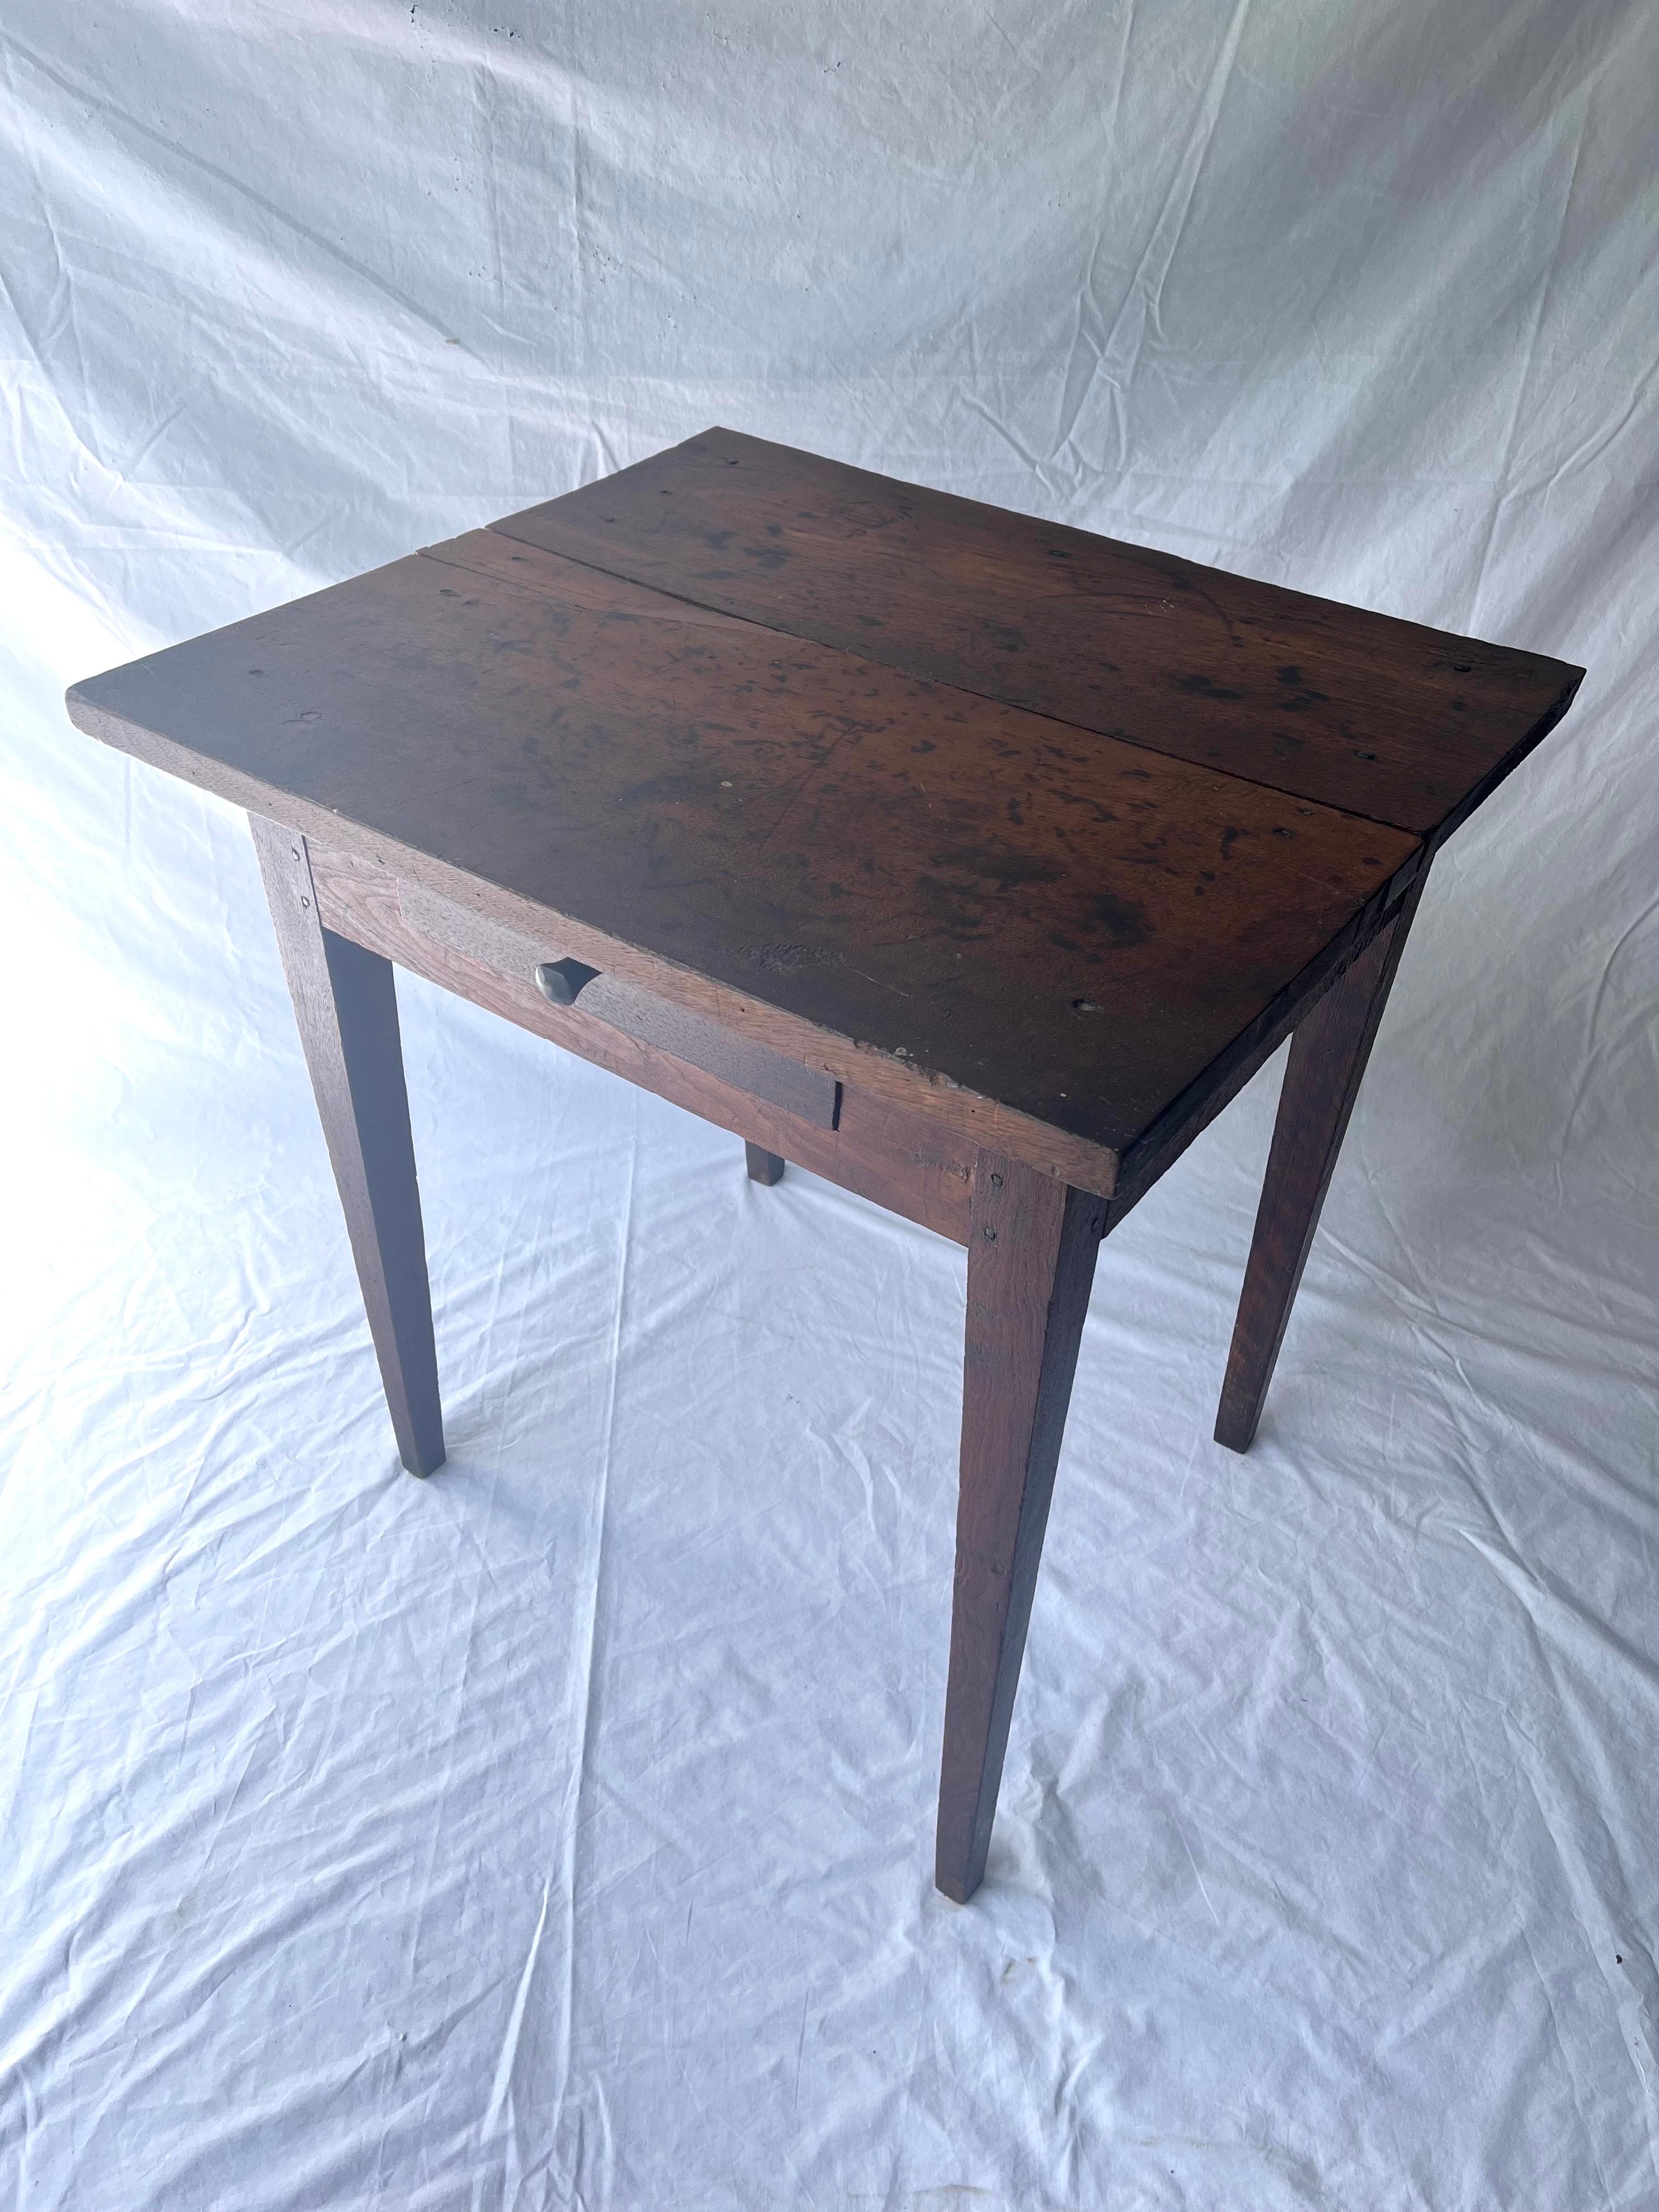 An antique, mid to late 19th century American hand built primitive one drawer farm table from Tennessee. I'll be the first (maybe) to tell you that antique dealers can spin a yarn. The dealer from whom I purchased this table - quick side note for a